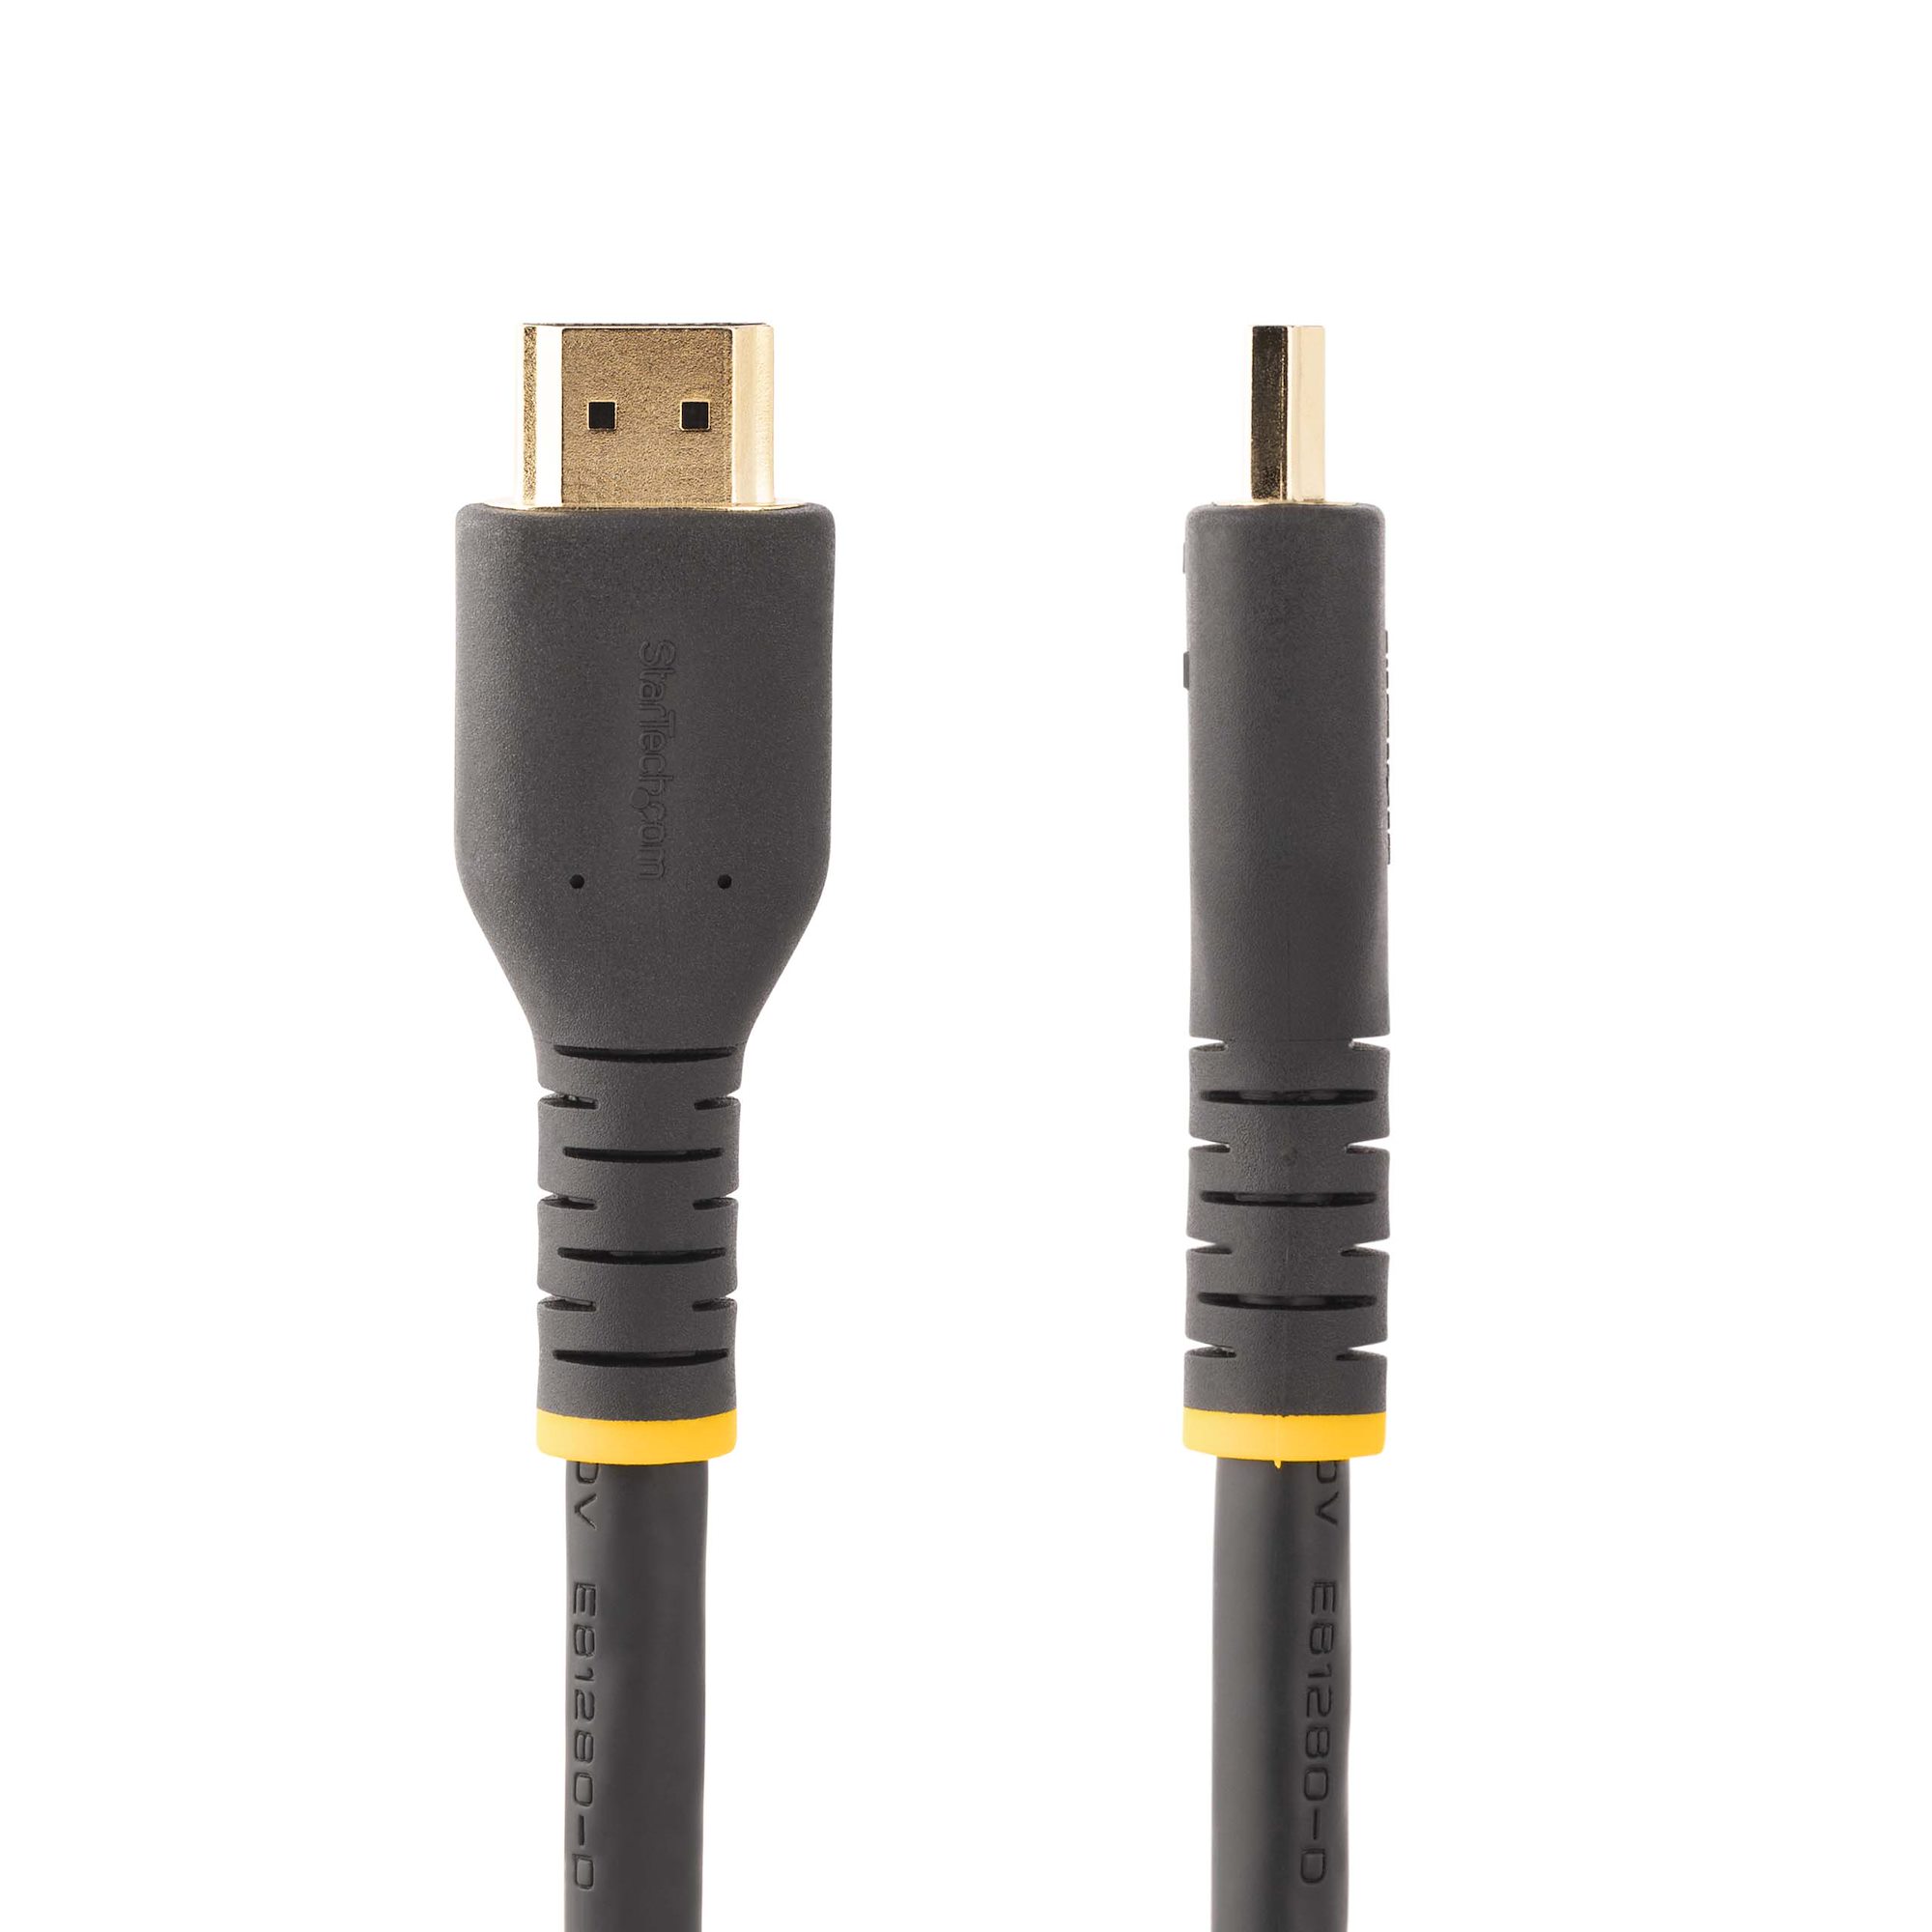 4K 60Hz Extra Long HDMI Cable over 10M